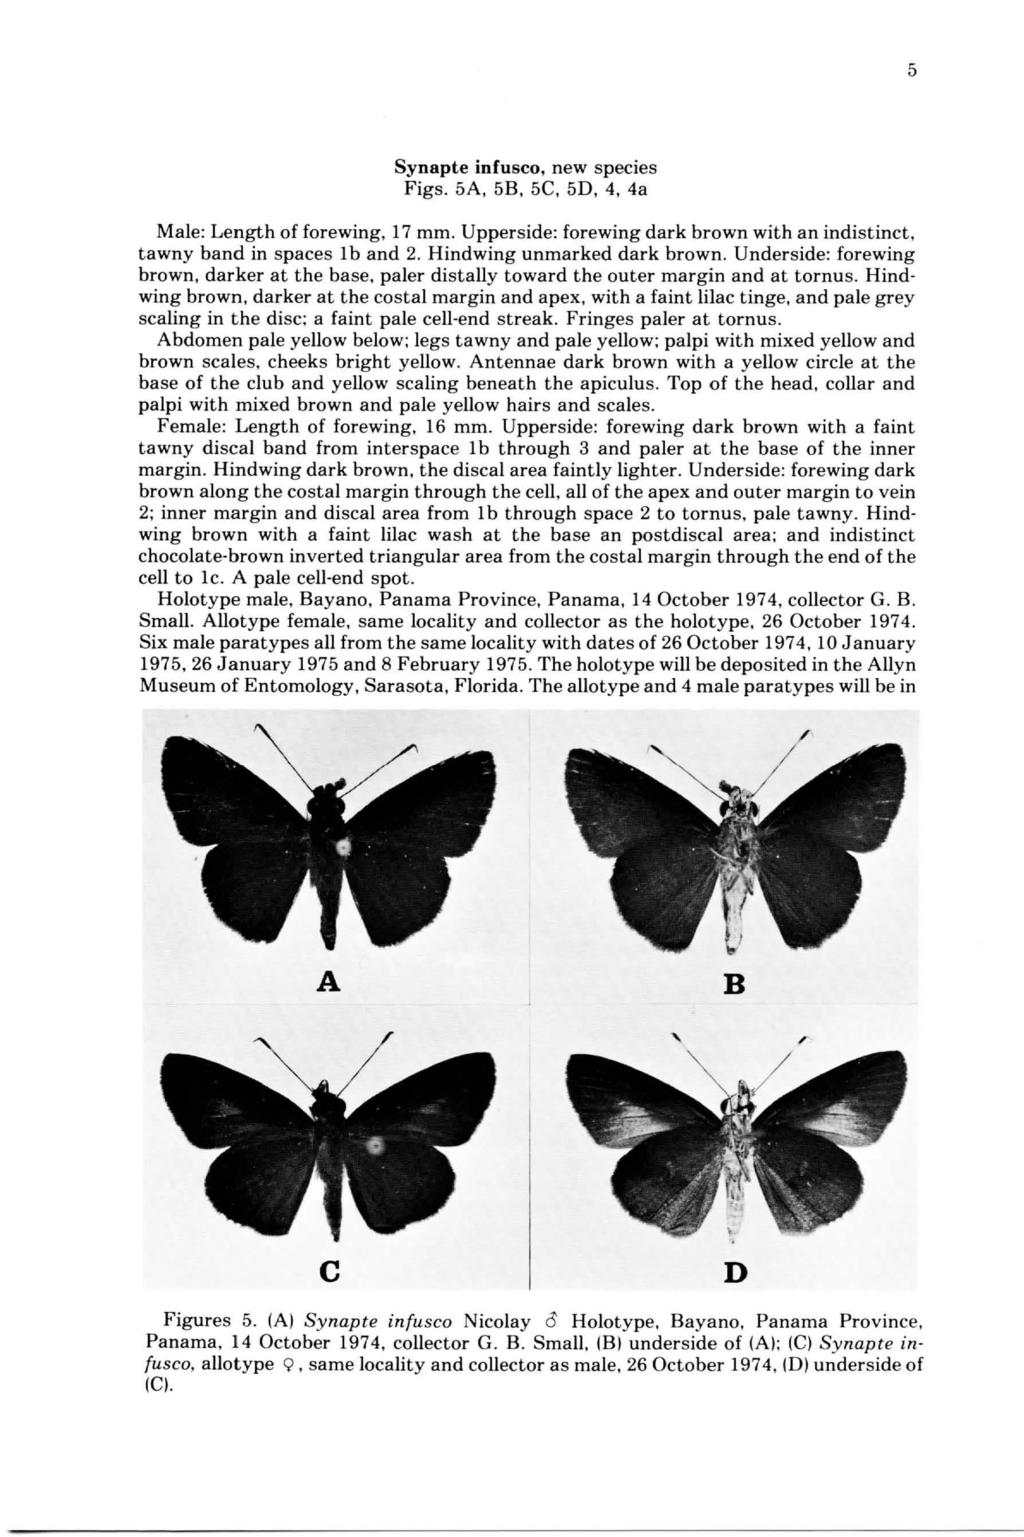 5 Synapte infusco, new species Figs. 5A, 58, 5C, 50, 4, 4a Male: Length of forewing, 17 mm. Upperside: forewing dark brown with an indistinct, tawny band in spaces 1b and 2.